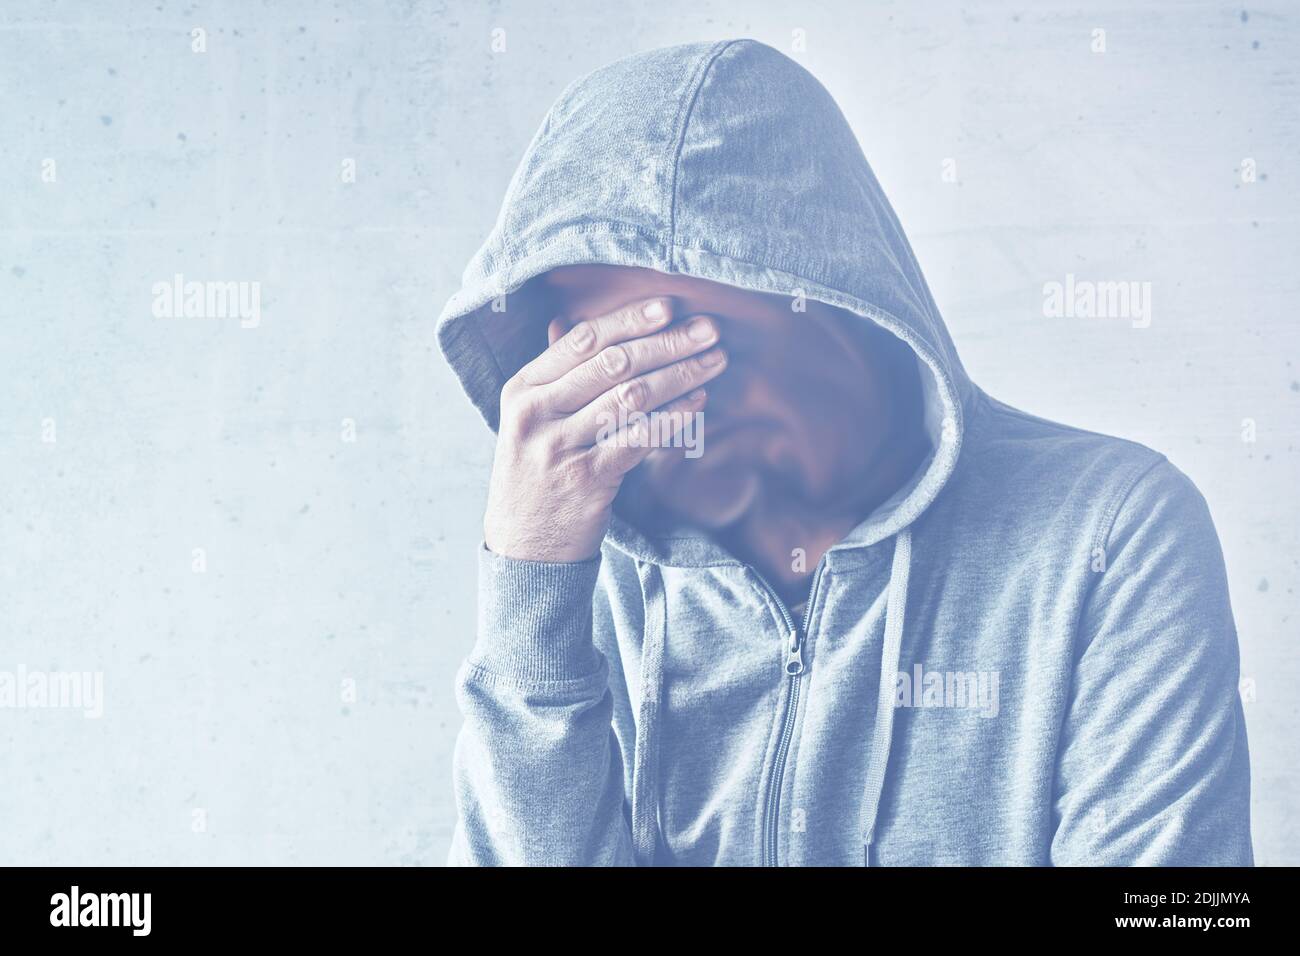 Schizophrenia and mental health illness concept, hooded male with melting face, copy space included Stock Photo